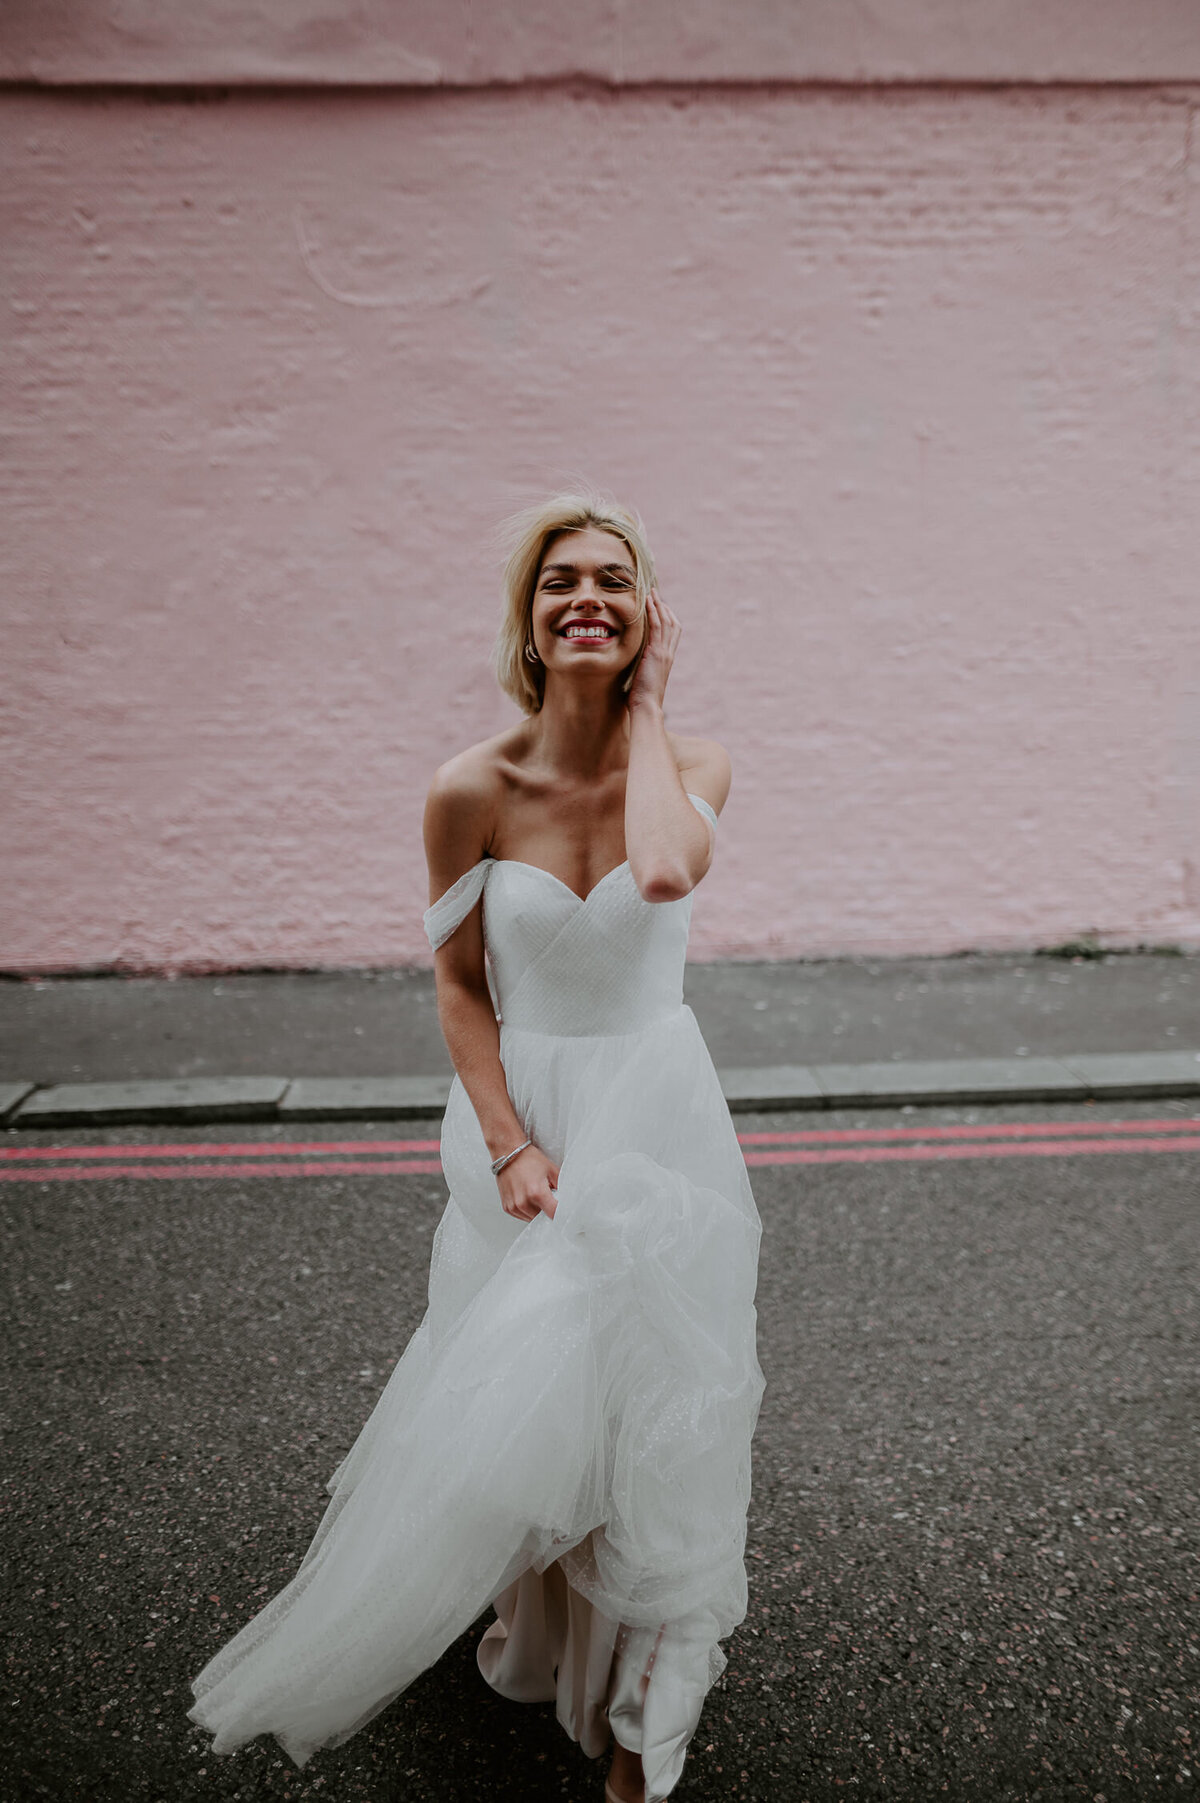 A bride in a shoulder cut Justin Alexander wedding dress tuckers her short hair behind her ear whilst standing in front of a pink walk in Shoreditch, London.